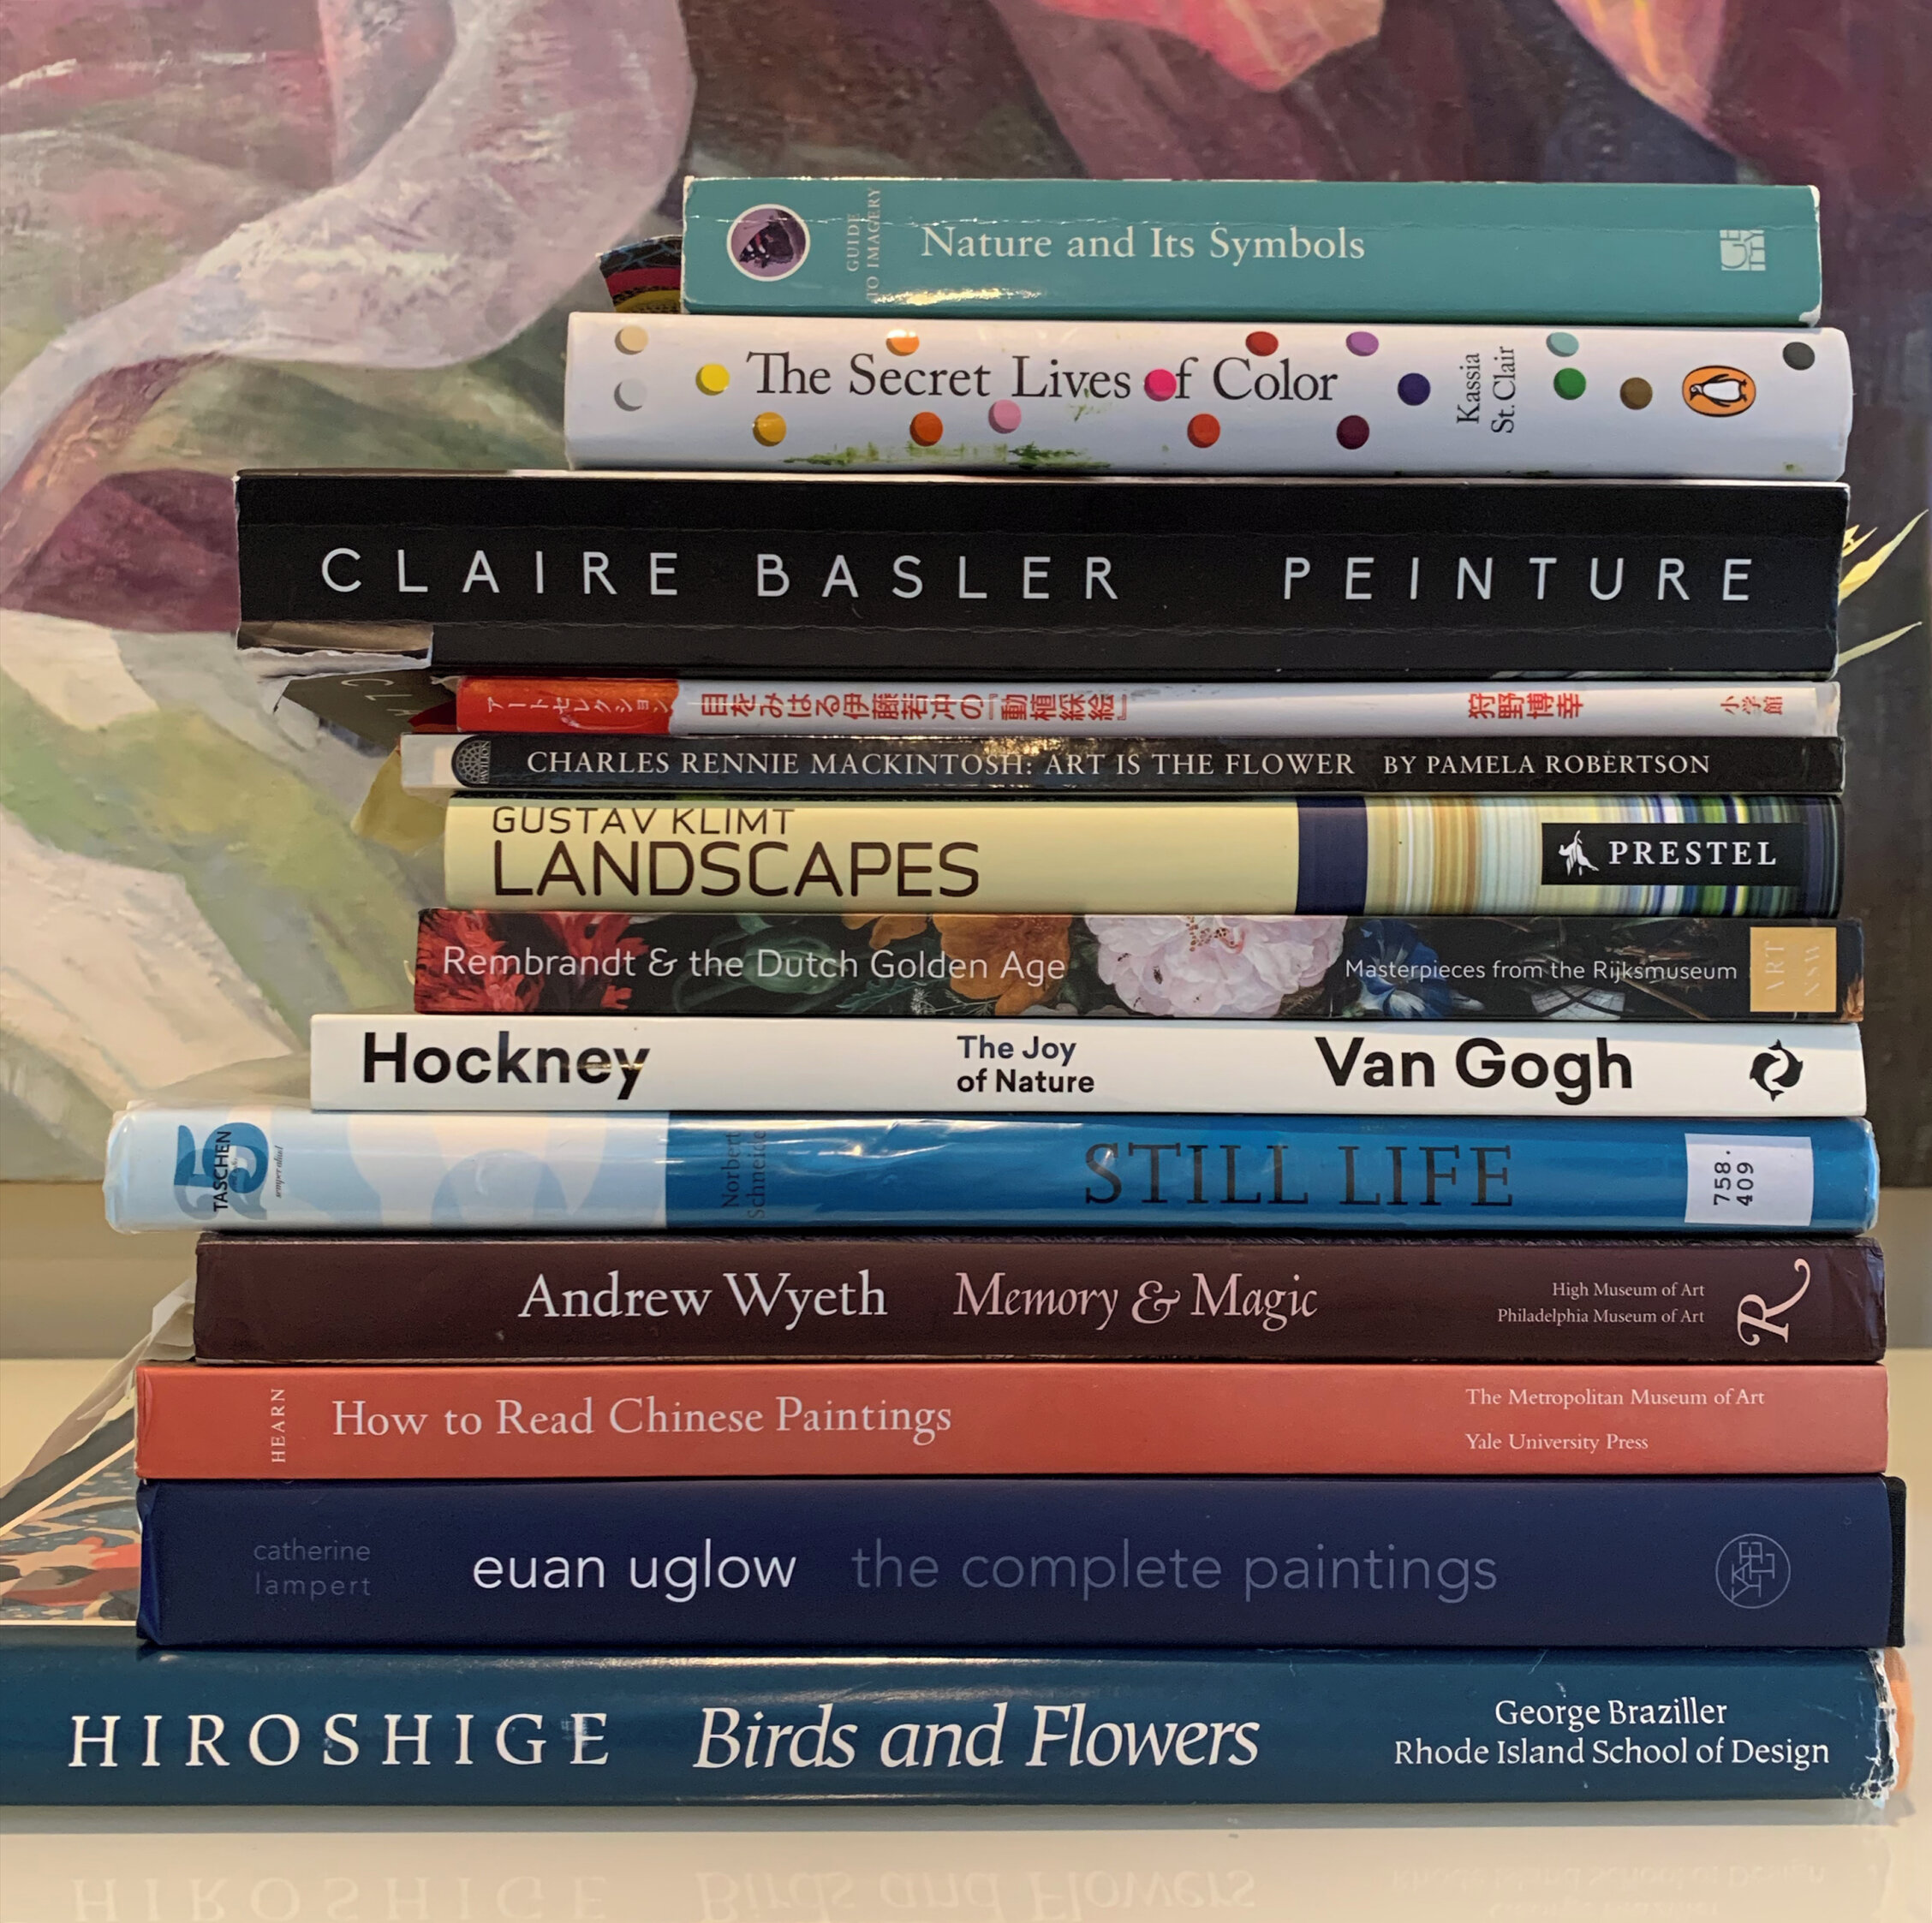 Being a huge art history nerd, I've been building my library. Some of my treasures I can't read - bought a few Japanese editions at Kinokuniya, the Claire Basler book is mostly in French. Thankfully the language of art is universal. Now teaching my p